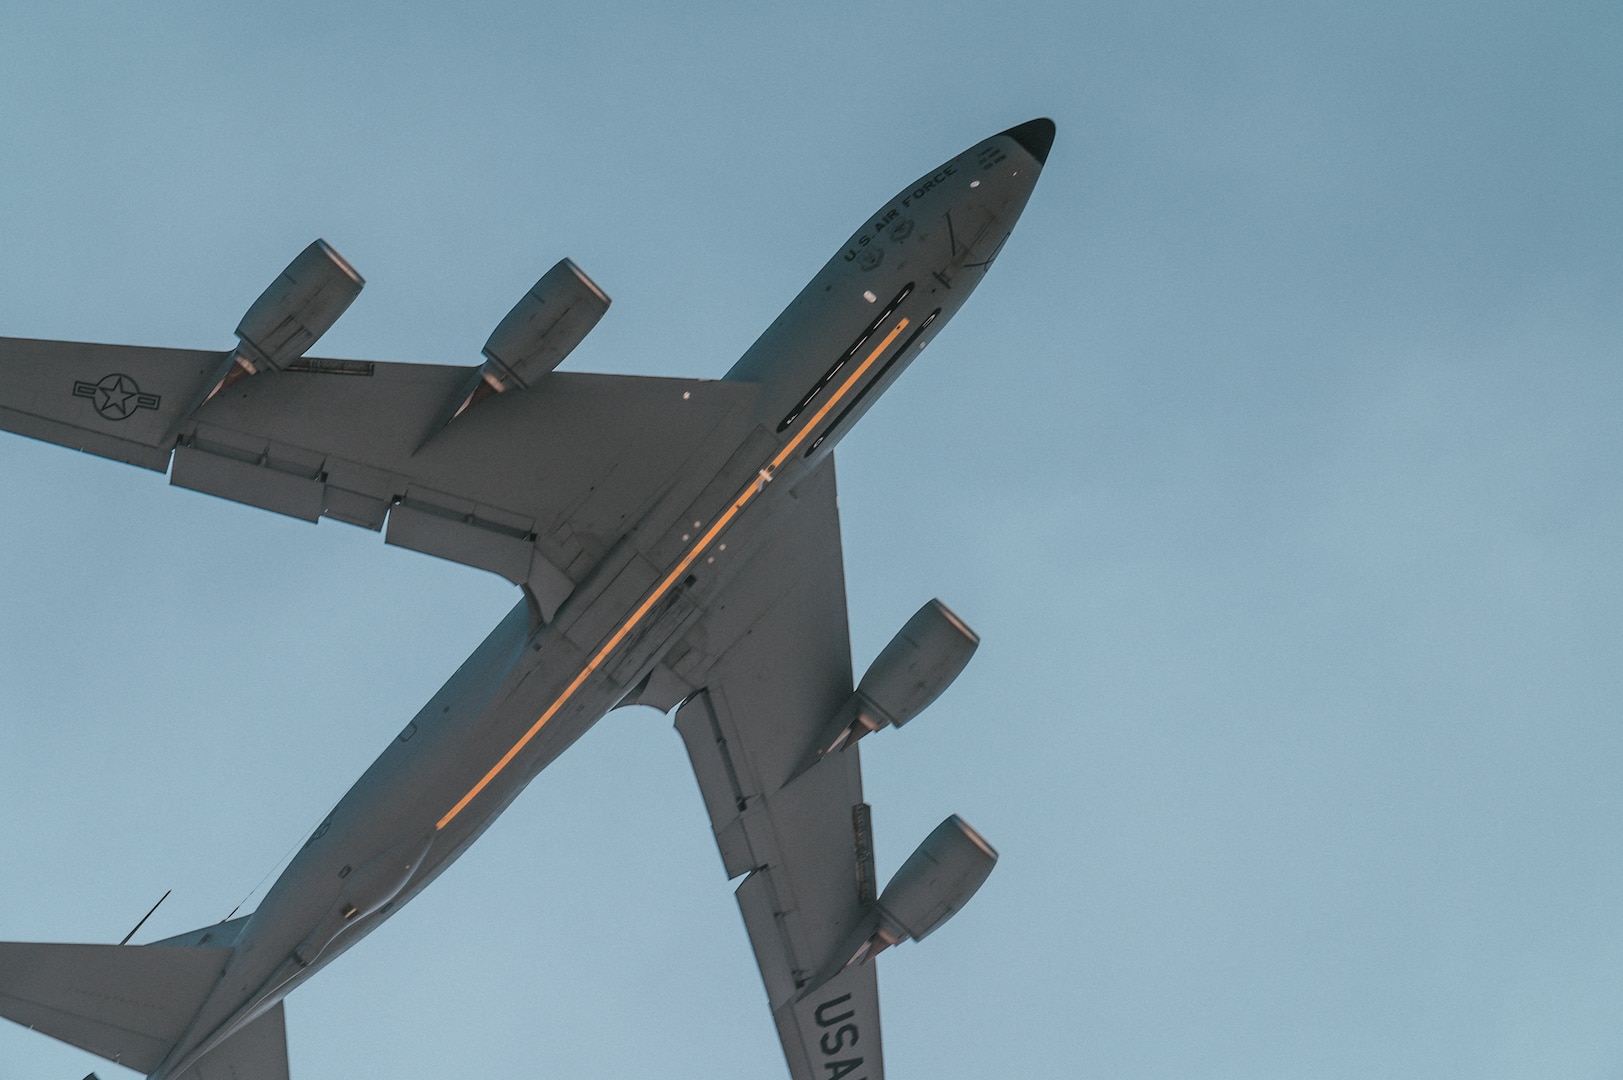 A U.S. Air Force KC-135 Stratotanker aircraft takes off from Al Udeid Air Base, Dec. 29, 2020. The jet took part in the first-ever cooperative air refueling of Qatar Emiri Air Force Rafale fighter jets. The 379th Air Expeditionary Wing has continued to forge resolute partnerships between Al Udeid AB and its host nation of Qatar through events like this.  (U.S. Air National Guard photo by Staff Sgt. Jordan Martin)